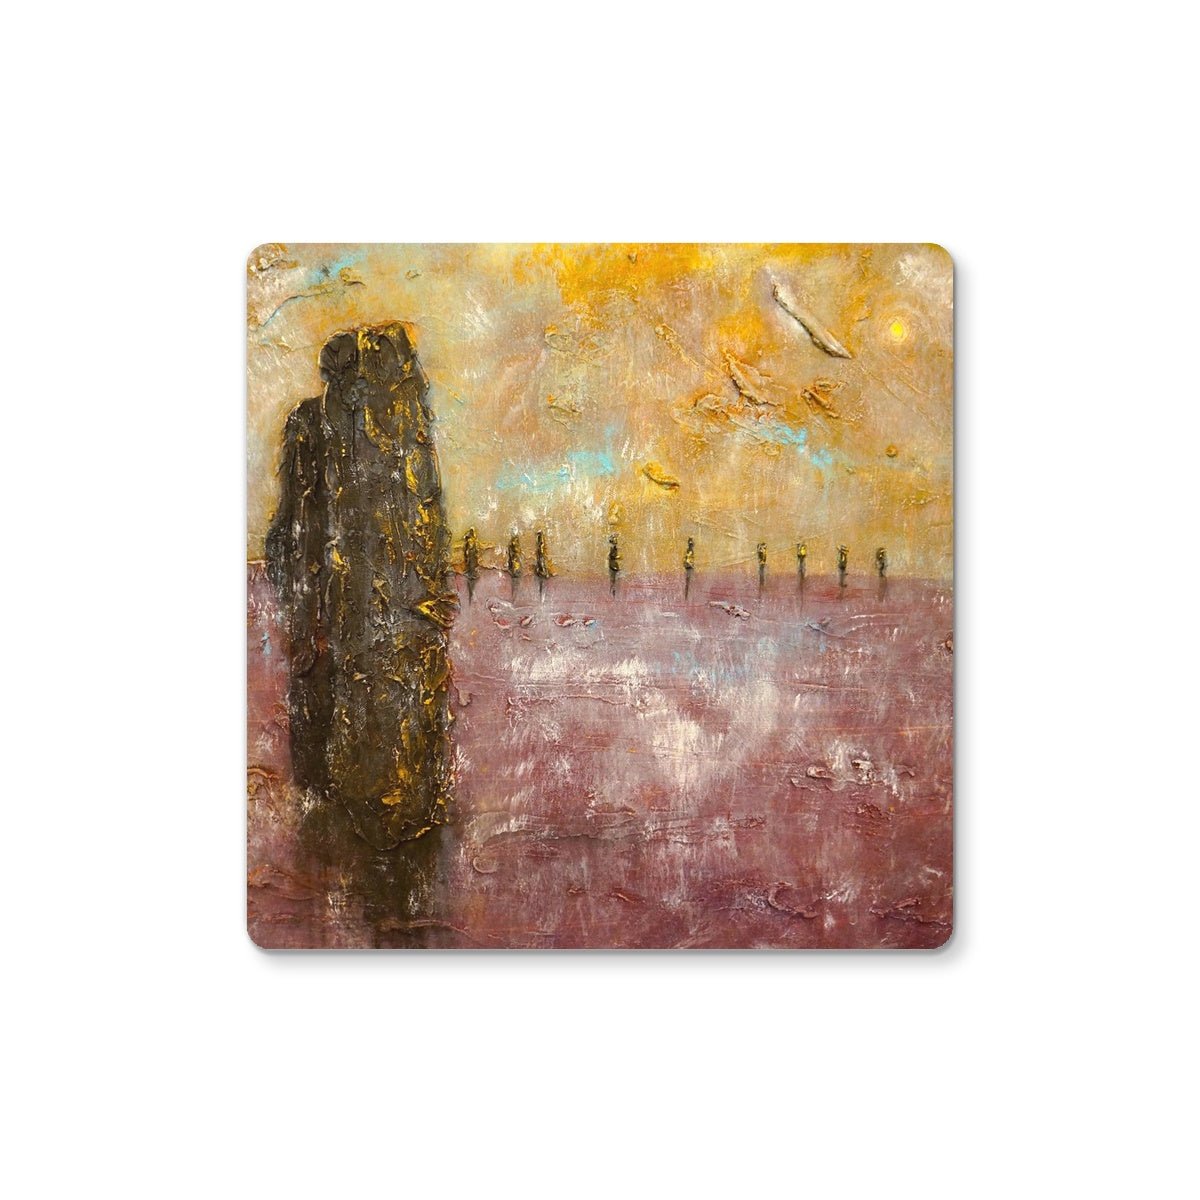 Bordgar Mist Orkney Art Gifts Coaster-Coasters-Orkney Art Gallery-Single Coaster-Paintings, Prints, Homeware, Art Gifts From Scotland By Scottish Artist Kevin Hunter